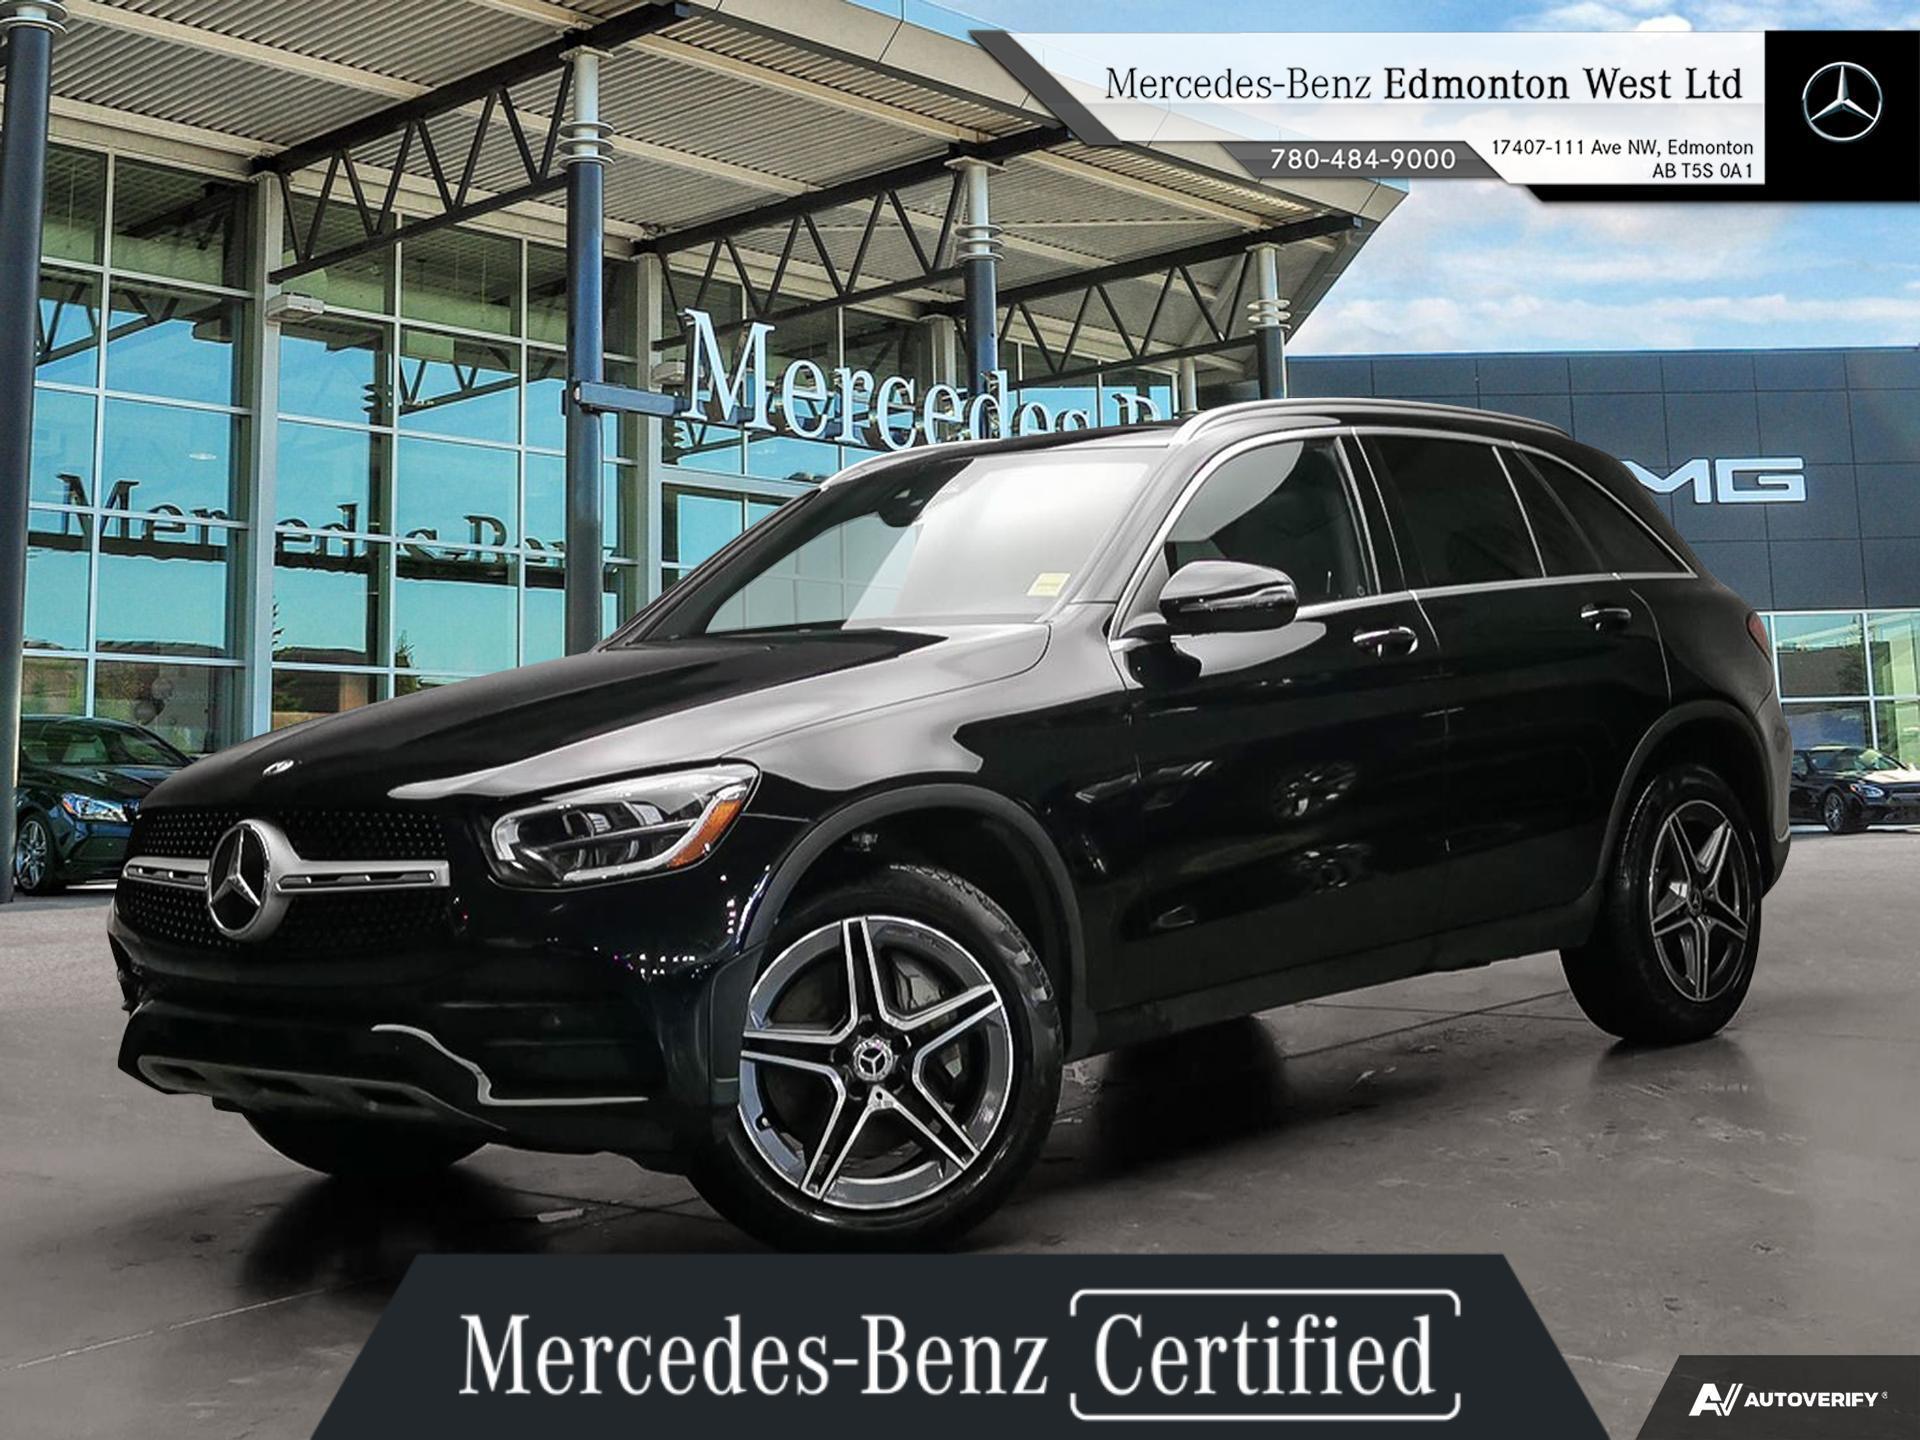 2020 Mercedes-Benz GLC 300 4MATIC SUV  - Low Kms - Xpel Protection Film -